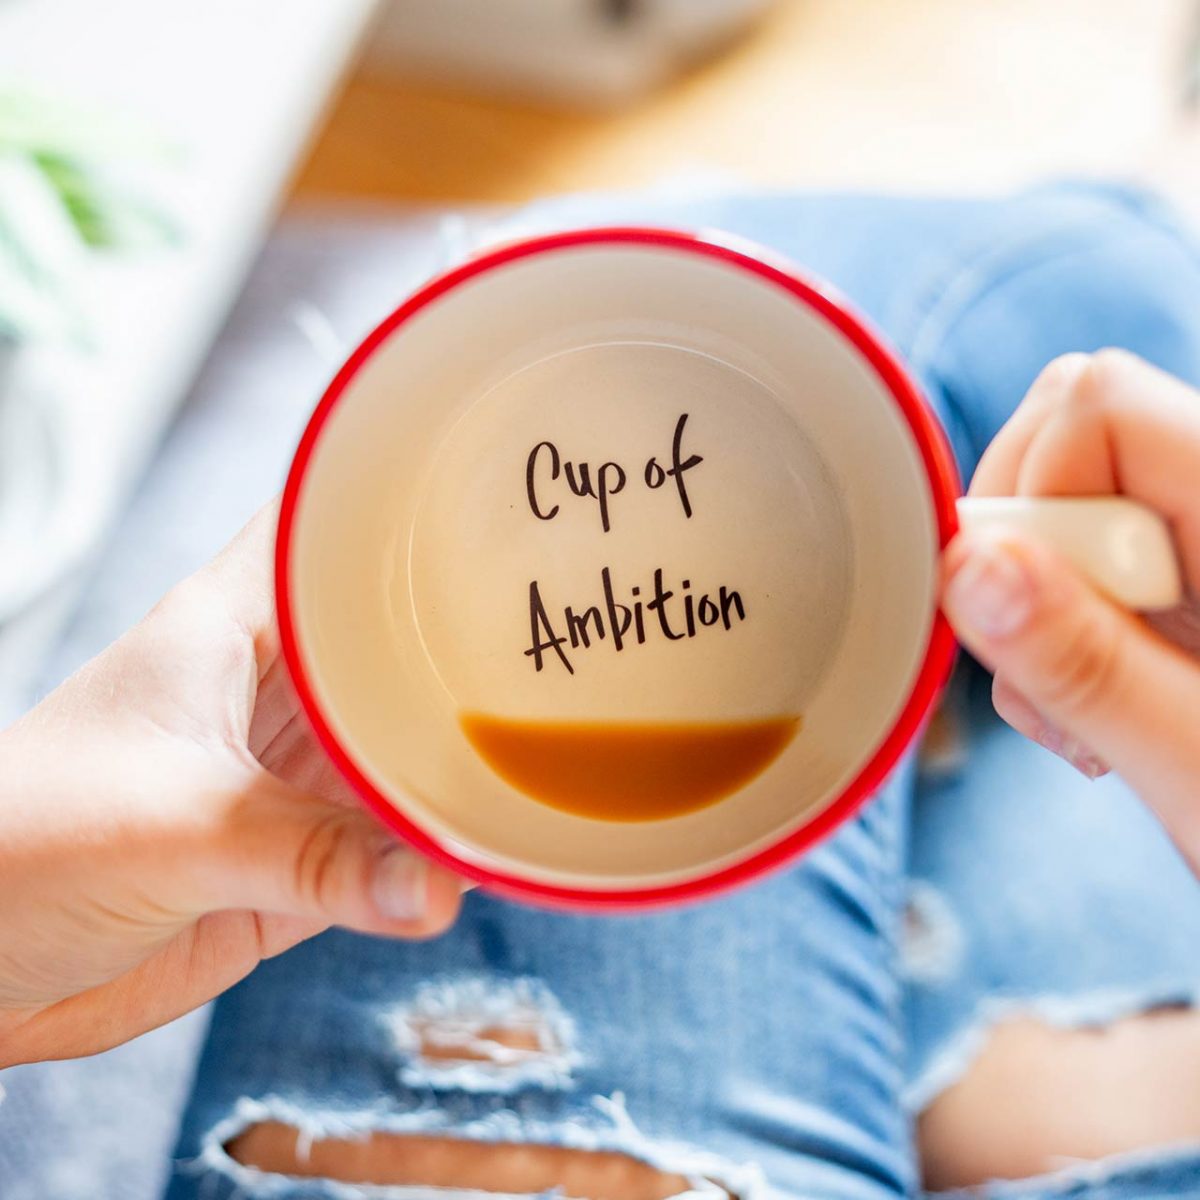 Cup of Ambition - Kate Ceramics